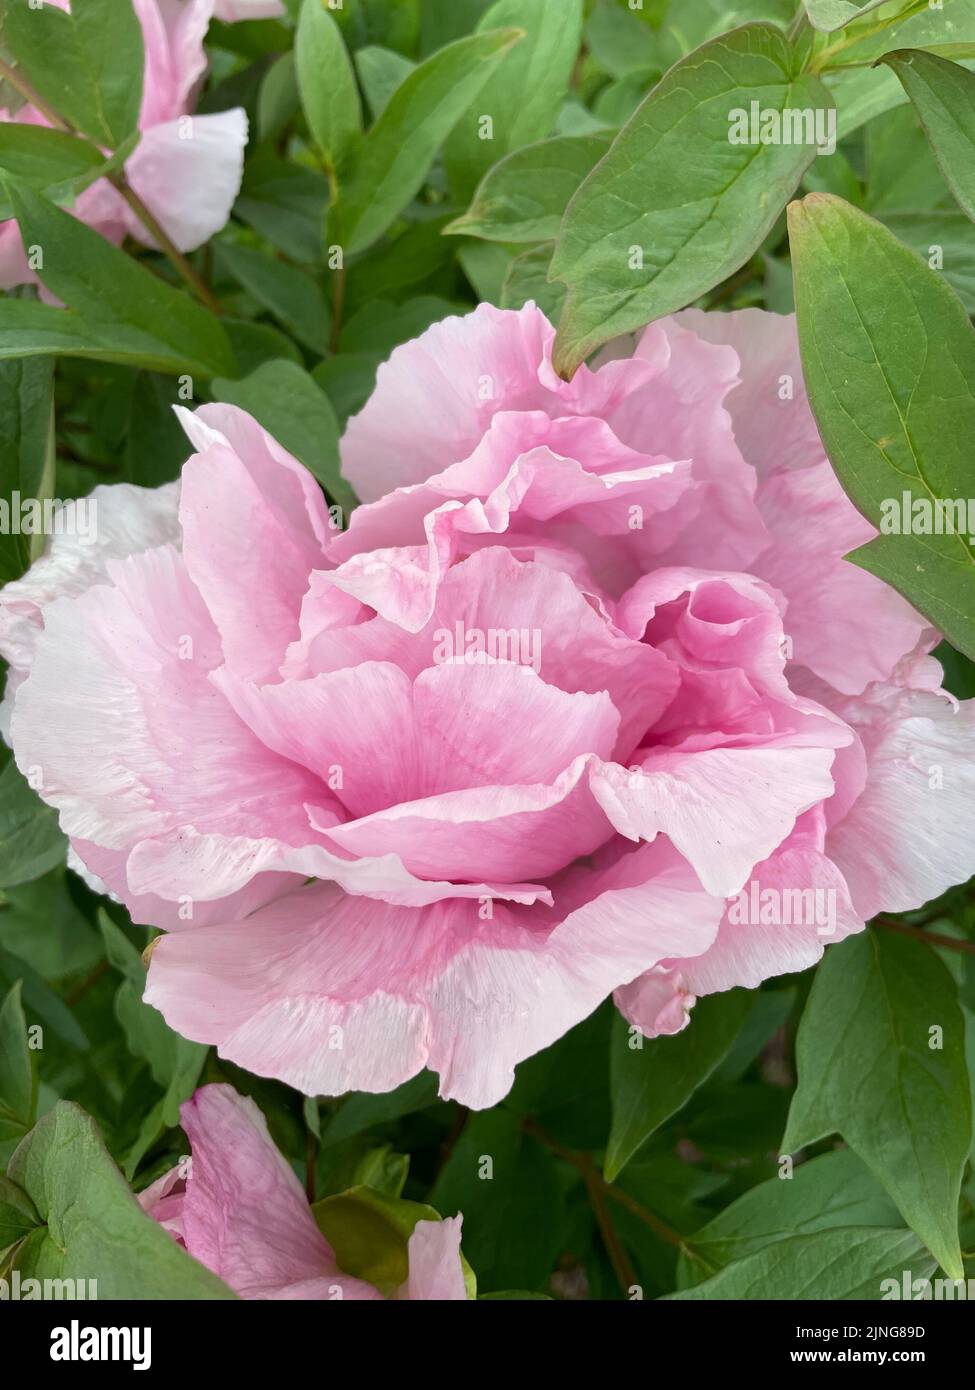 Peony Tree blossom (Paeonia 'Globe of Light') close-up for flower and petal with green leaves in soft focus in the background. Stock Photo